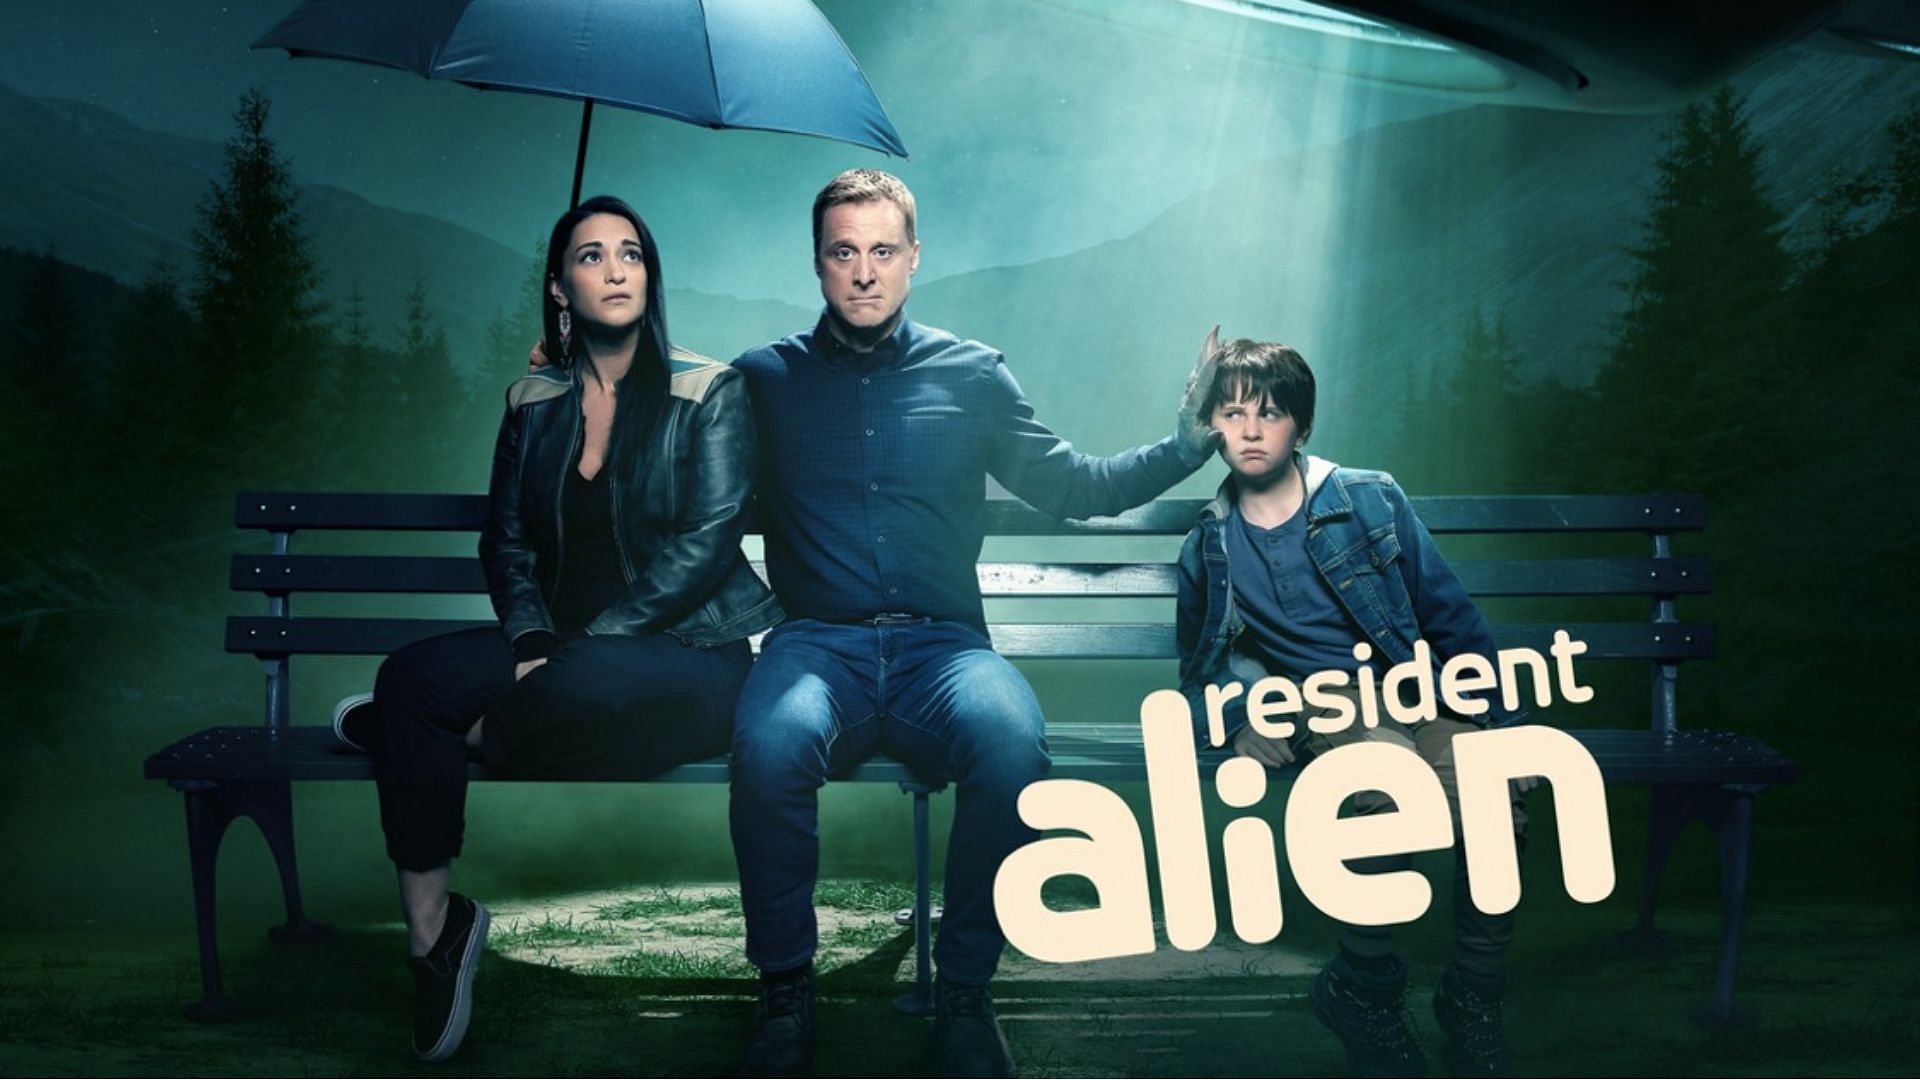 Resident Alien Season 2, Part 2 What to expect